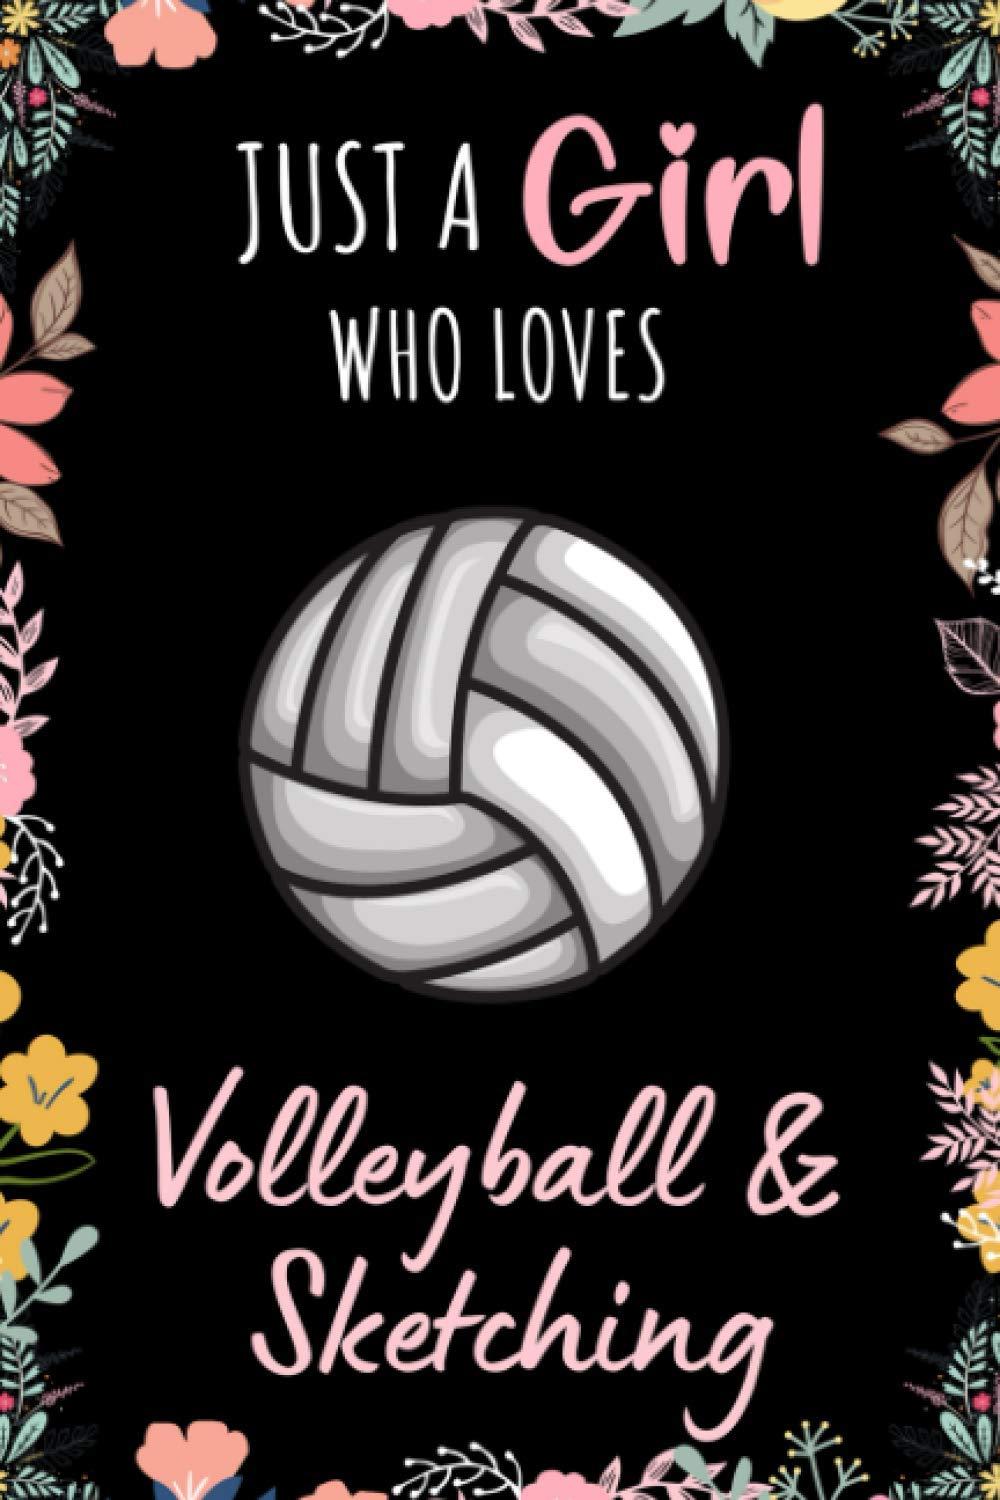 1993 Volleyball Love Images Stock Photos  Vectors  Shutterstock